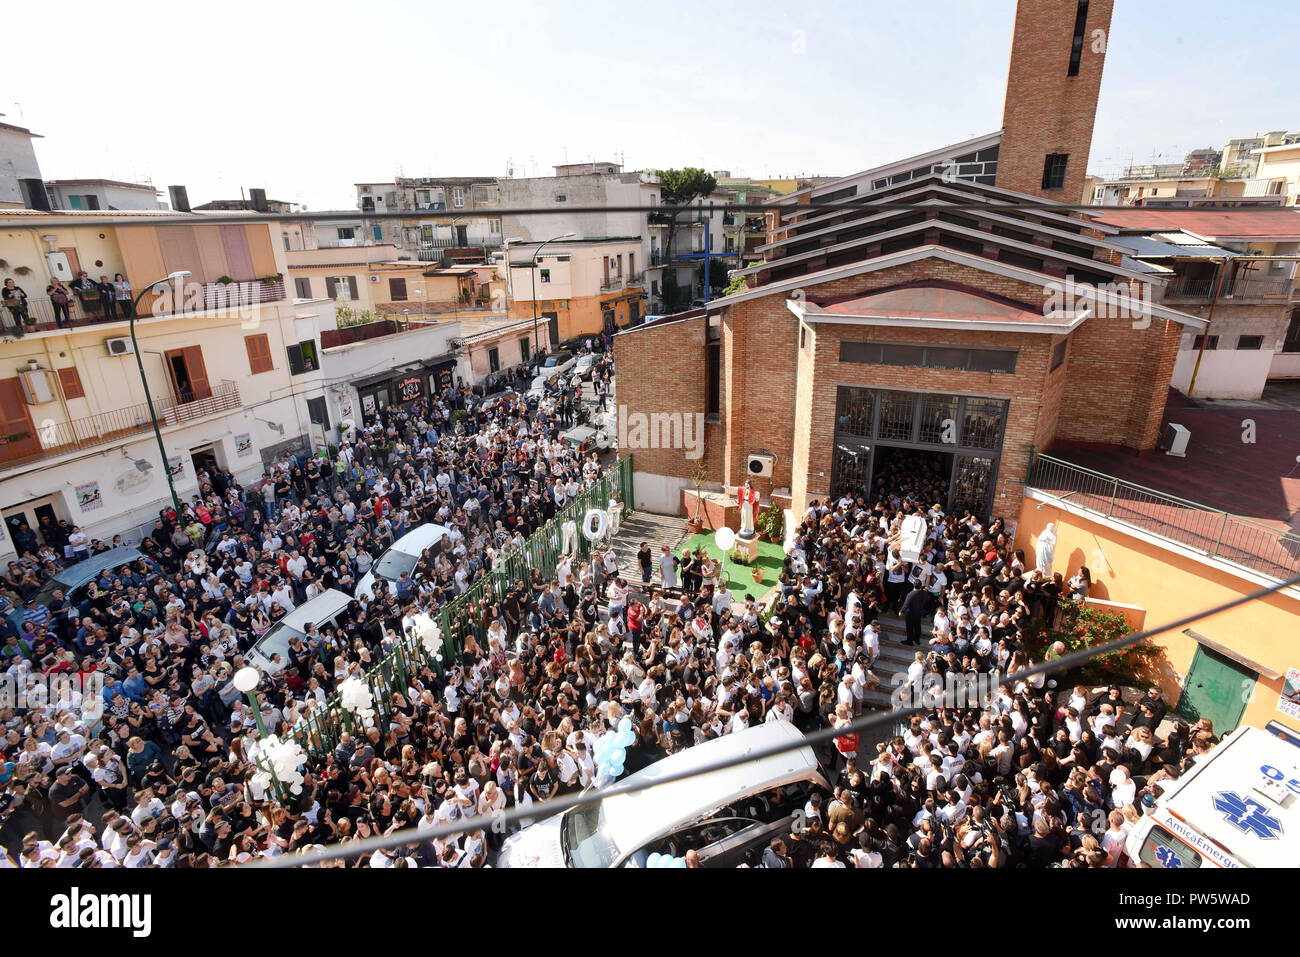 Naples, a moment of the funeral of Raffaele Perinelli, at the church of Sant'Alfonso and San Gerardo in via Janfolla in Miano. The 21-year-old football player was stabbed in the chest and killed Saturday night after a fight with a neighbor. 12/10/2018, Naples, Italy Stock Photo